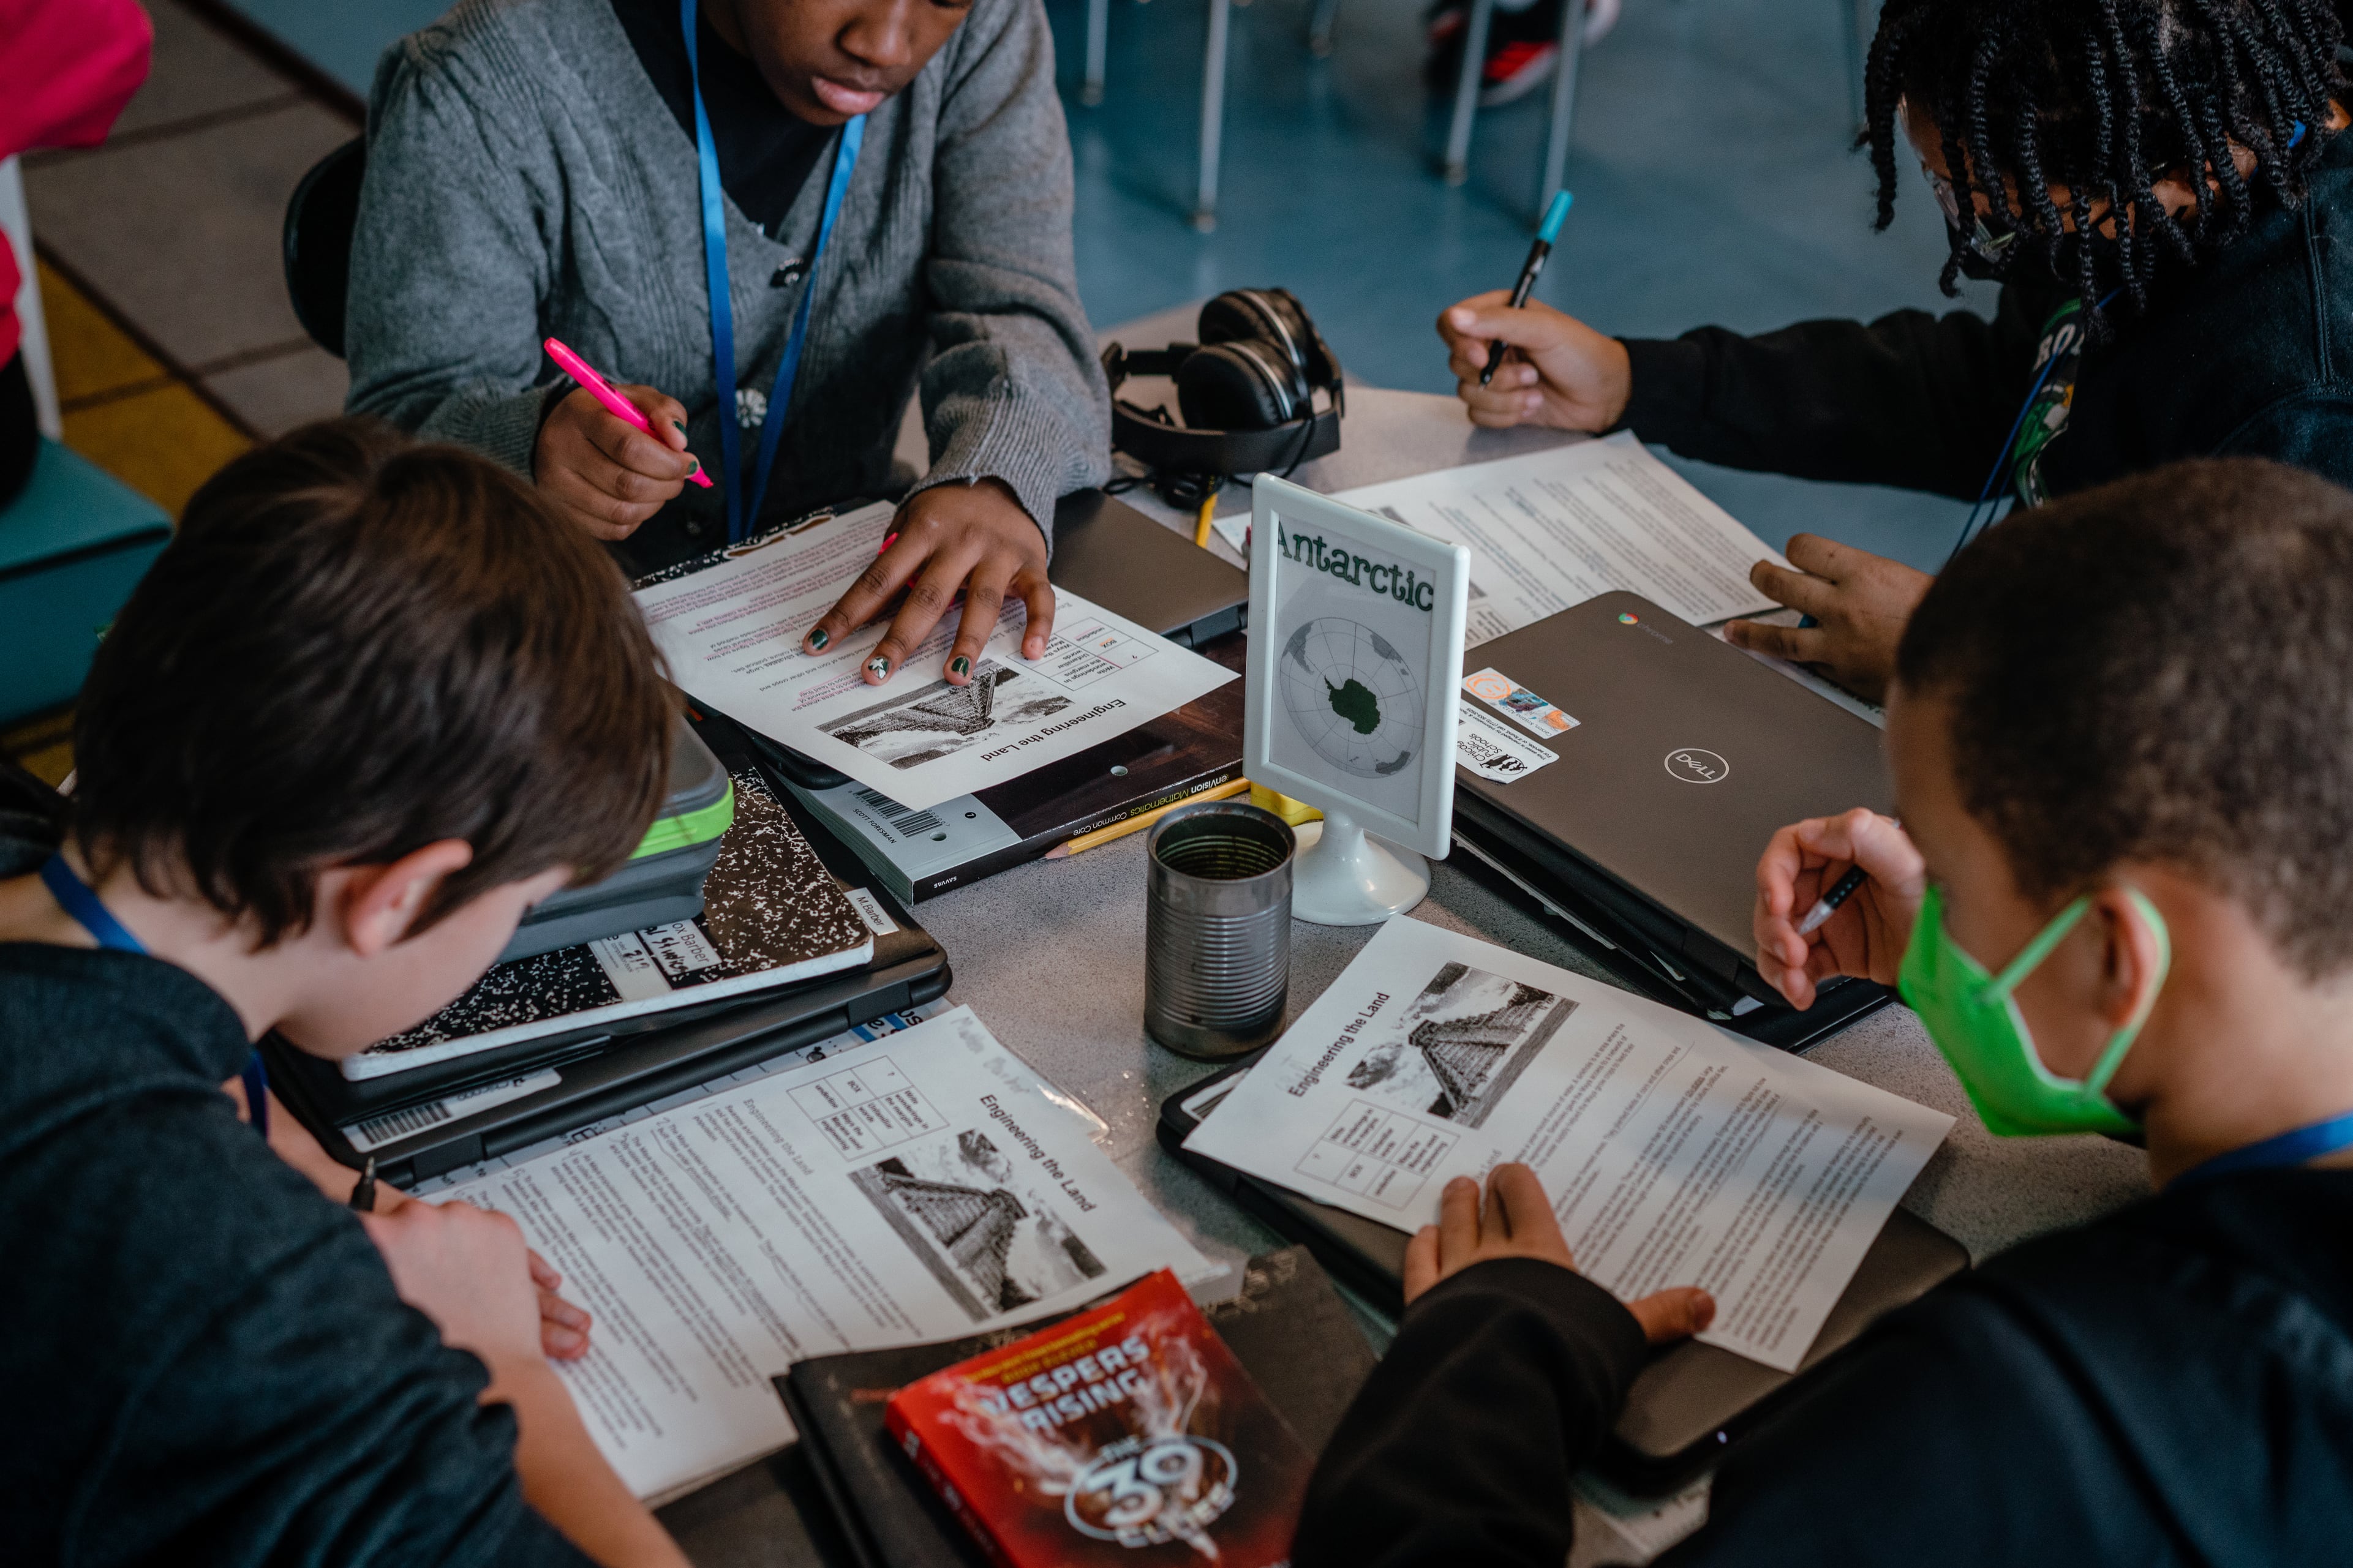 A group of four students work on worksheets together at their desks. The district has enrolled a smaller and smaller share of students from low-income families over the past decade.